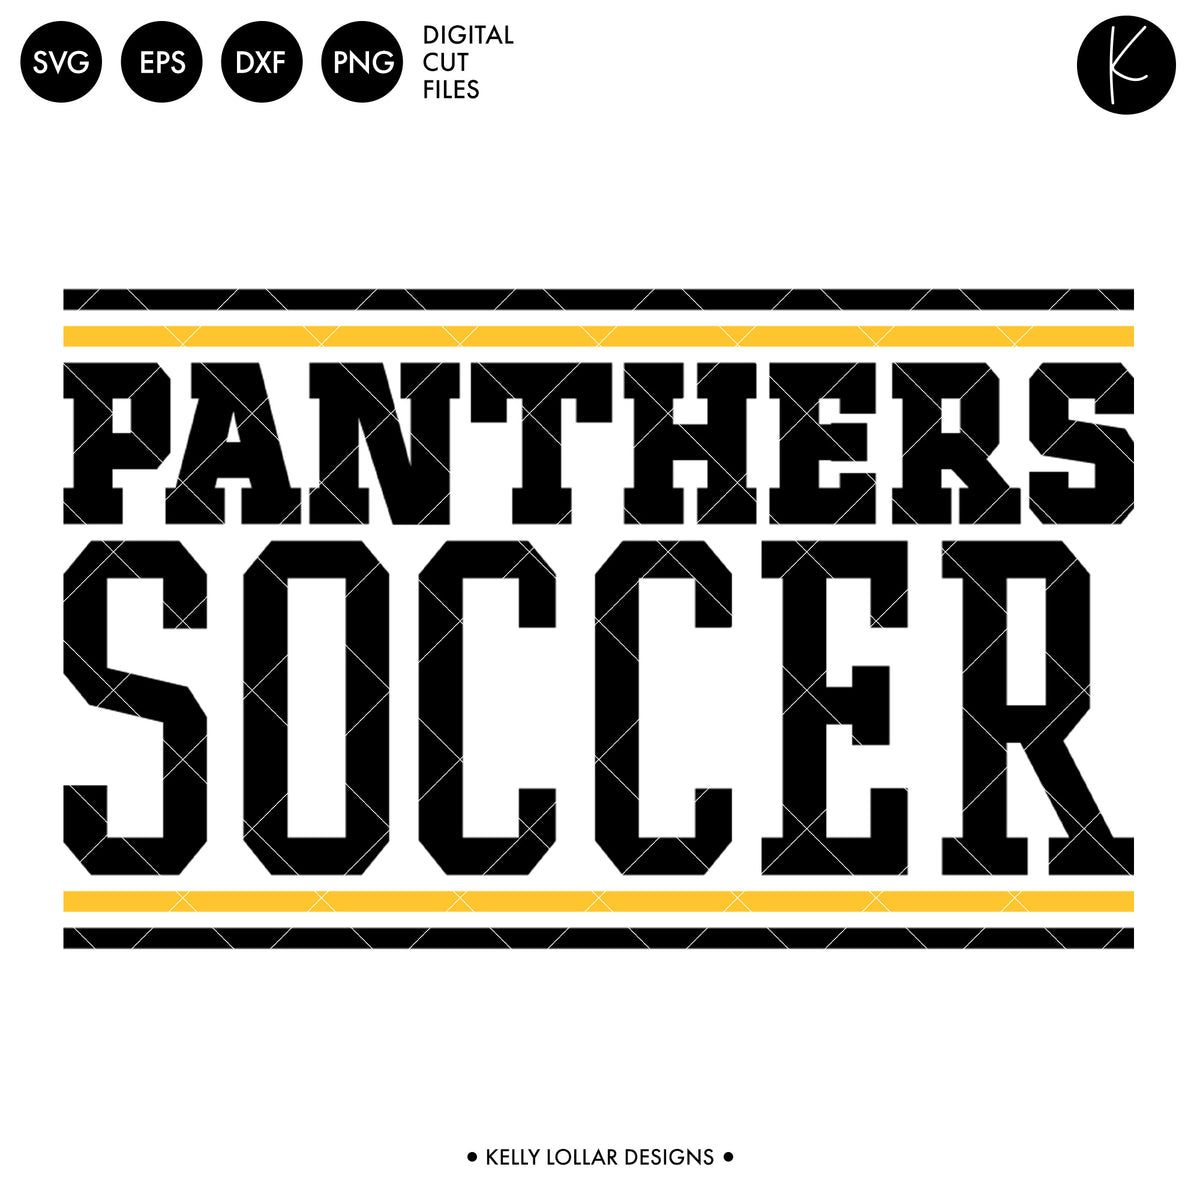 Panthers Soccer and Football Bundle | SVG DXF EPS PNG Cut Files